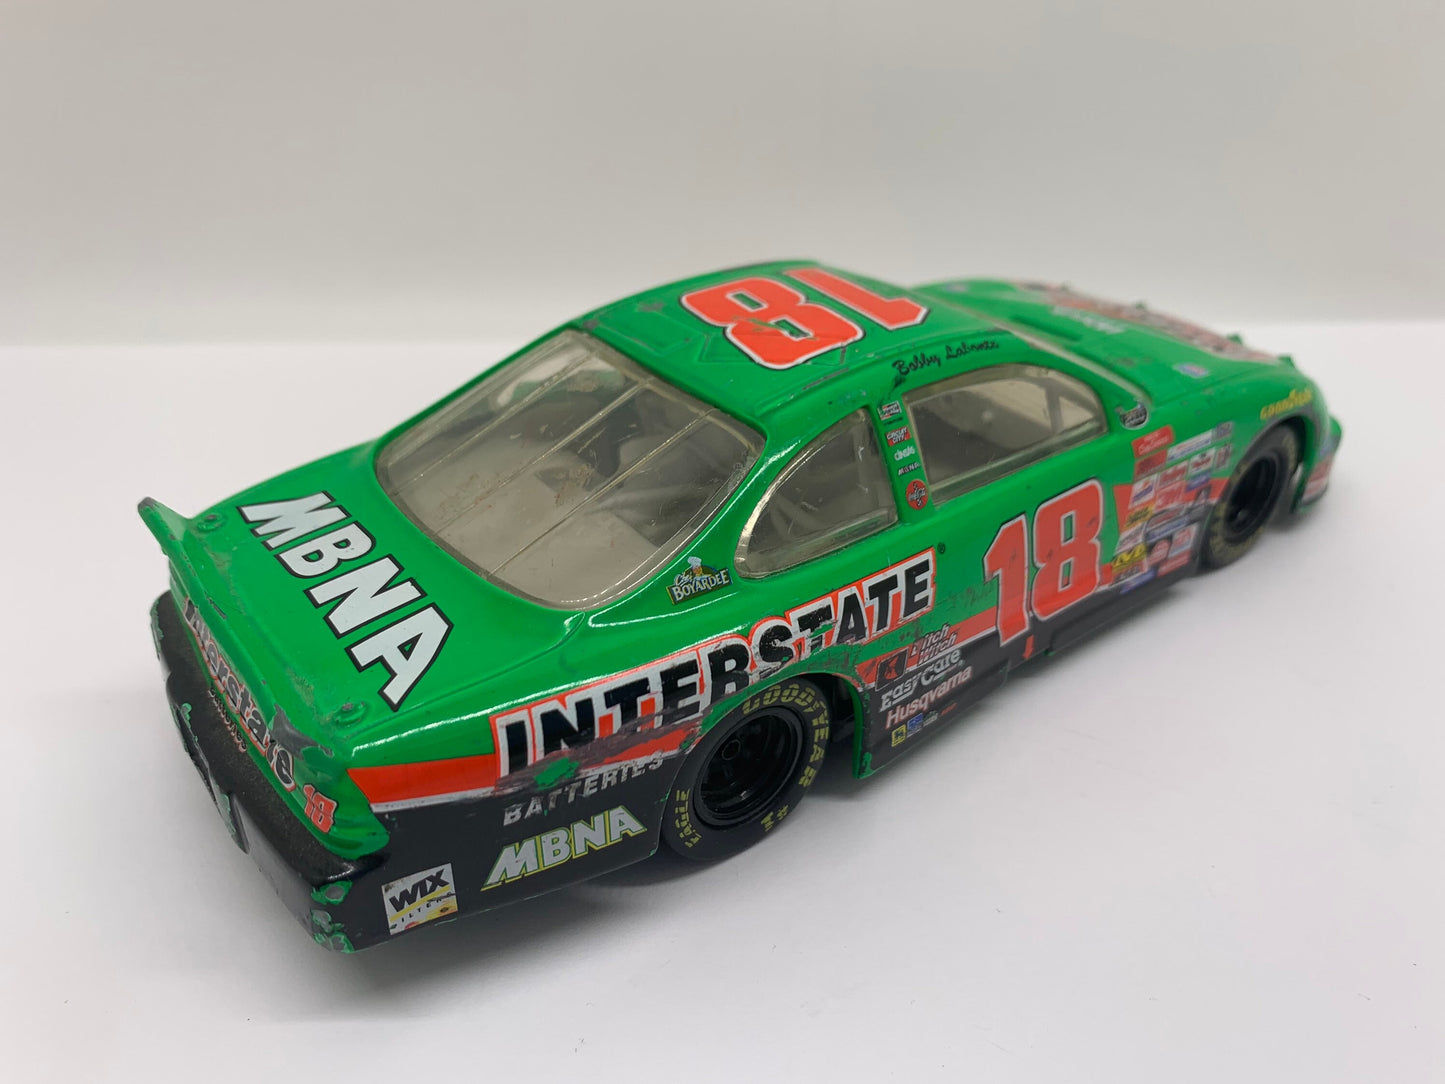 Interstate Batteries 1999 Pontiac Grand Prix Stock Car Green Hasbro Collectable Replica Scale Model Toy Car Nascar Car Perfect Birthday Gift